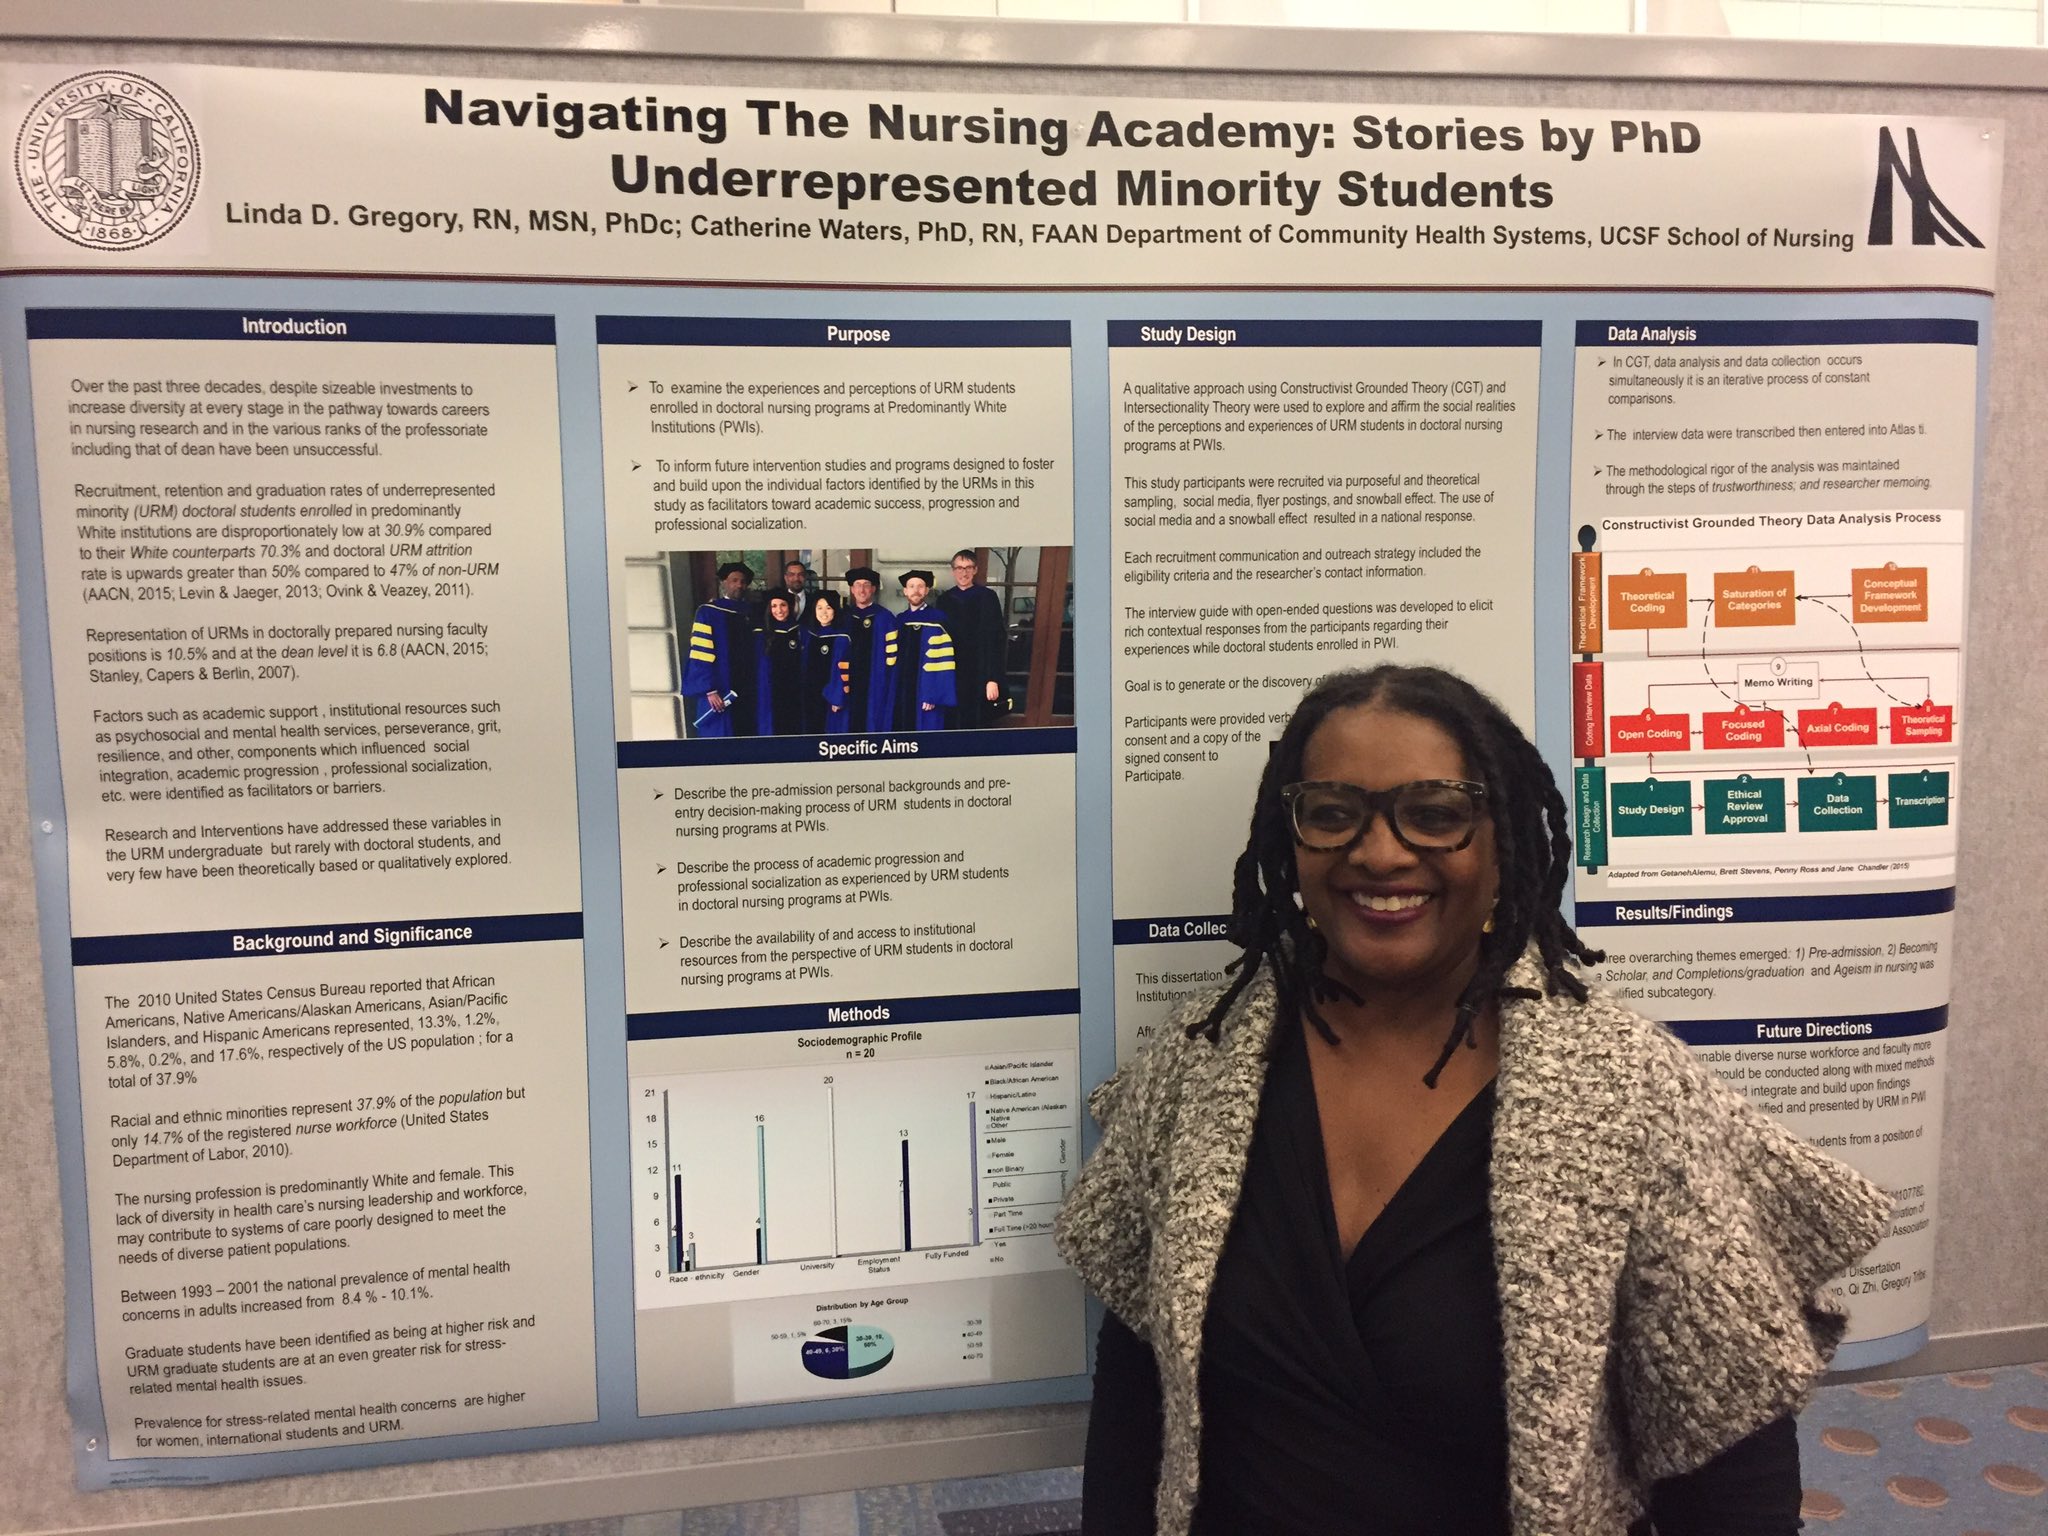 From Twitter: Linda Gregory’s groundbreaking work on experiences of diverse PhD students #wincon50 @UCSFNurse.